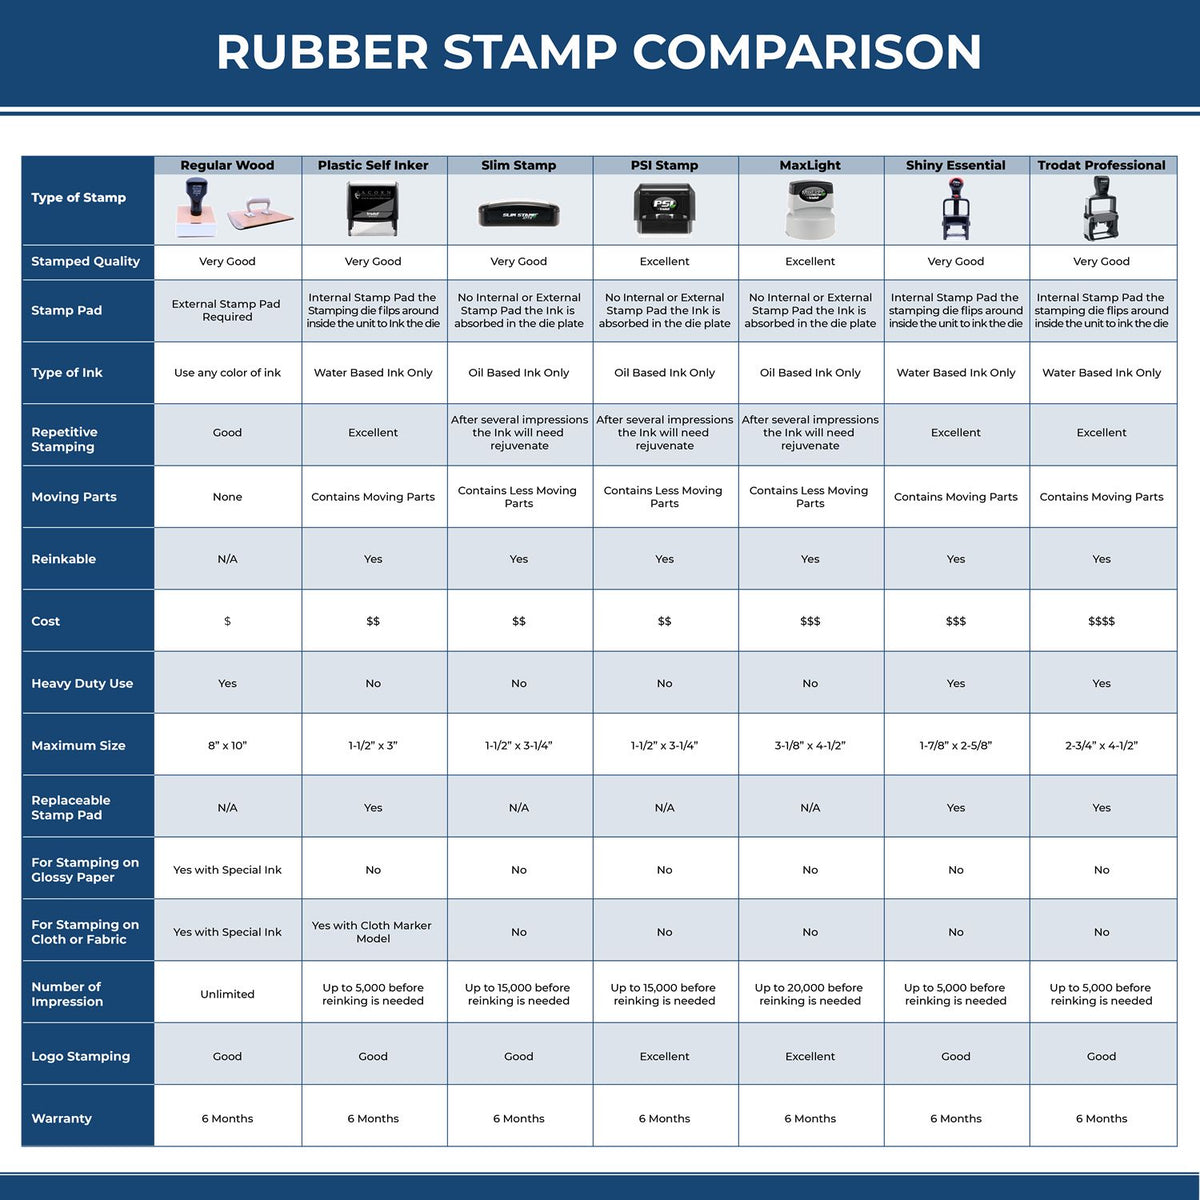 A comparison chart for the different types of mount models available for the Self-Inking Rectangular Missouri Notary Stamp.